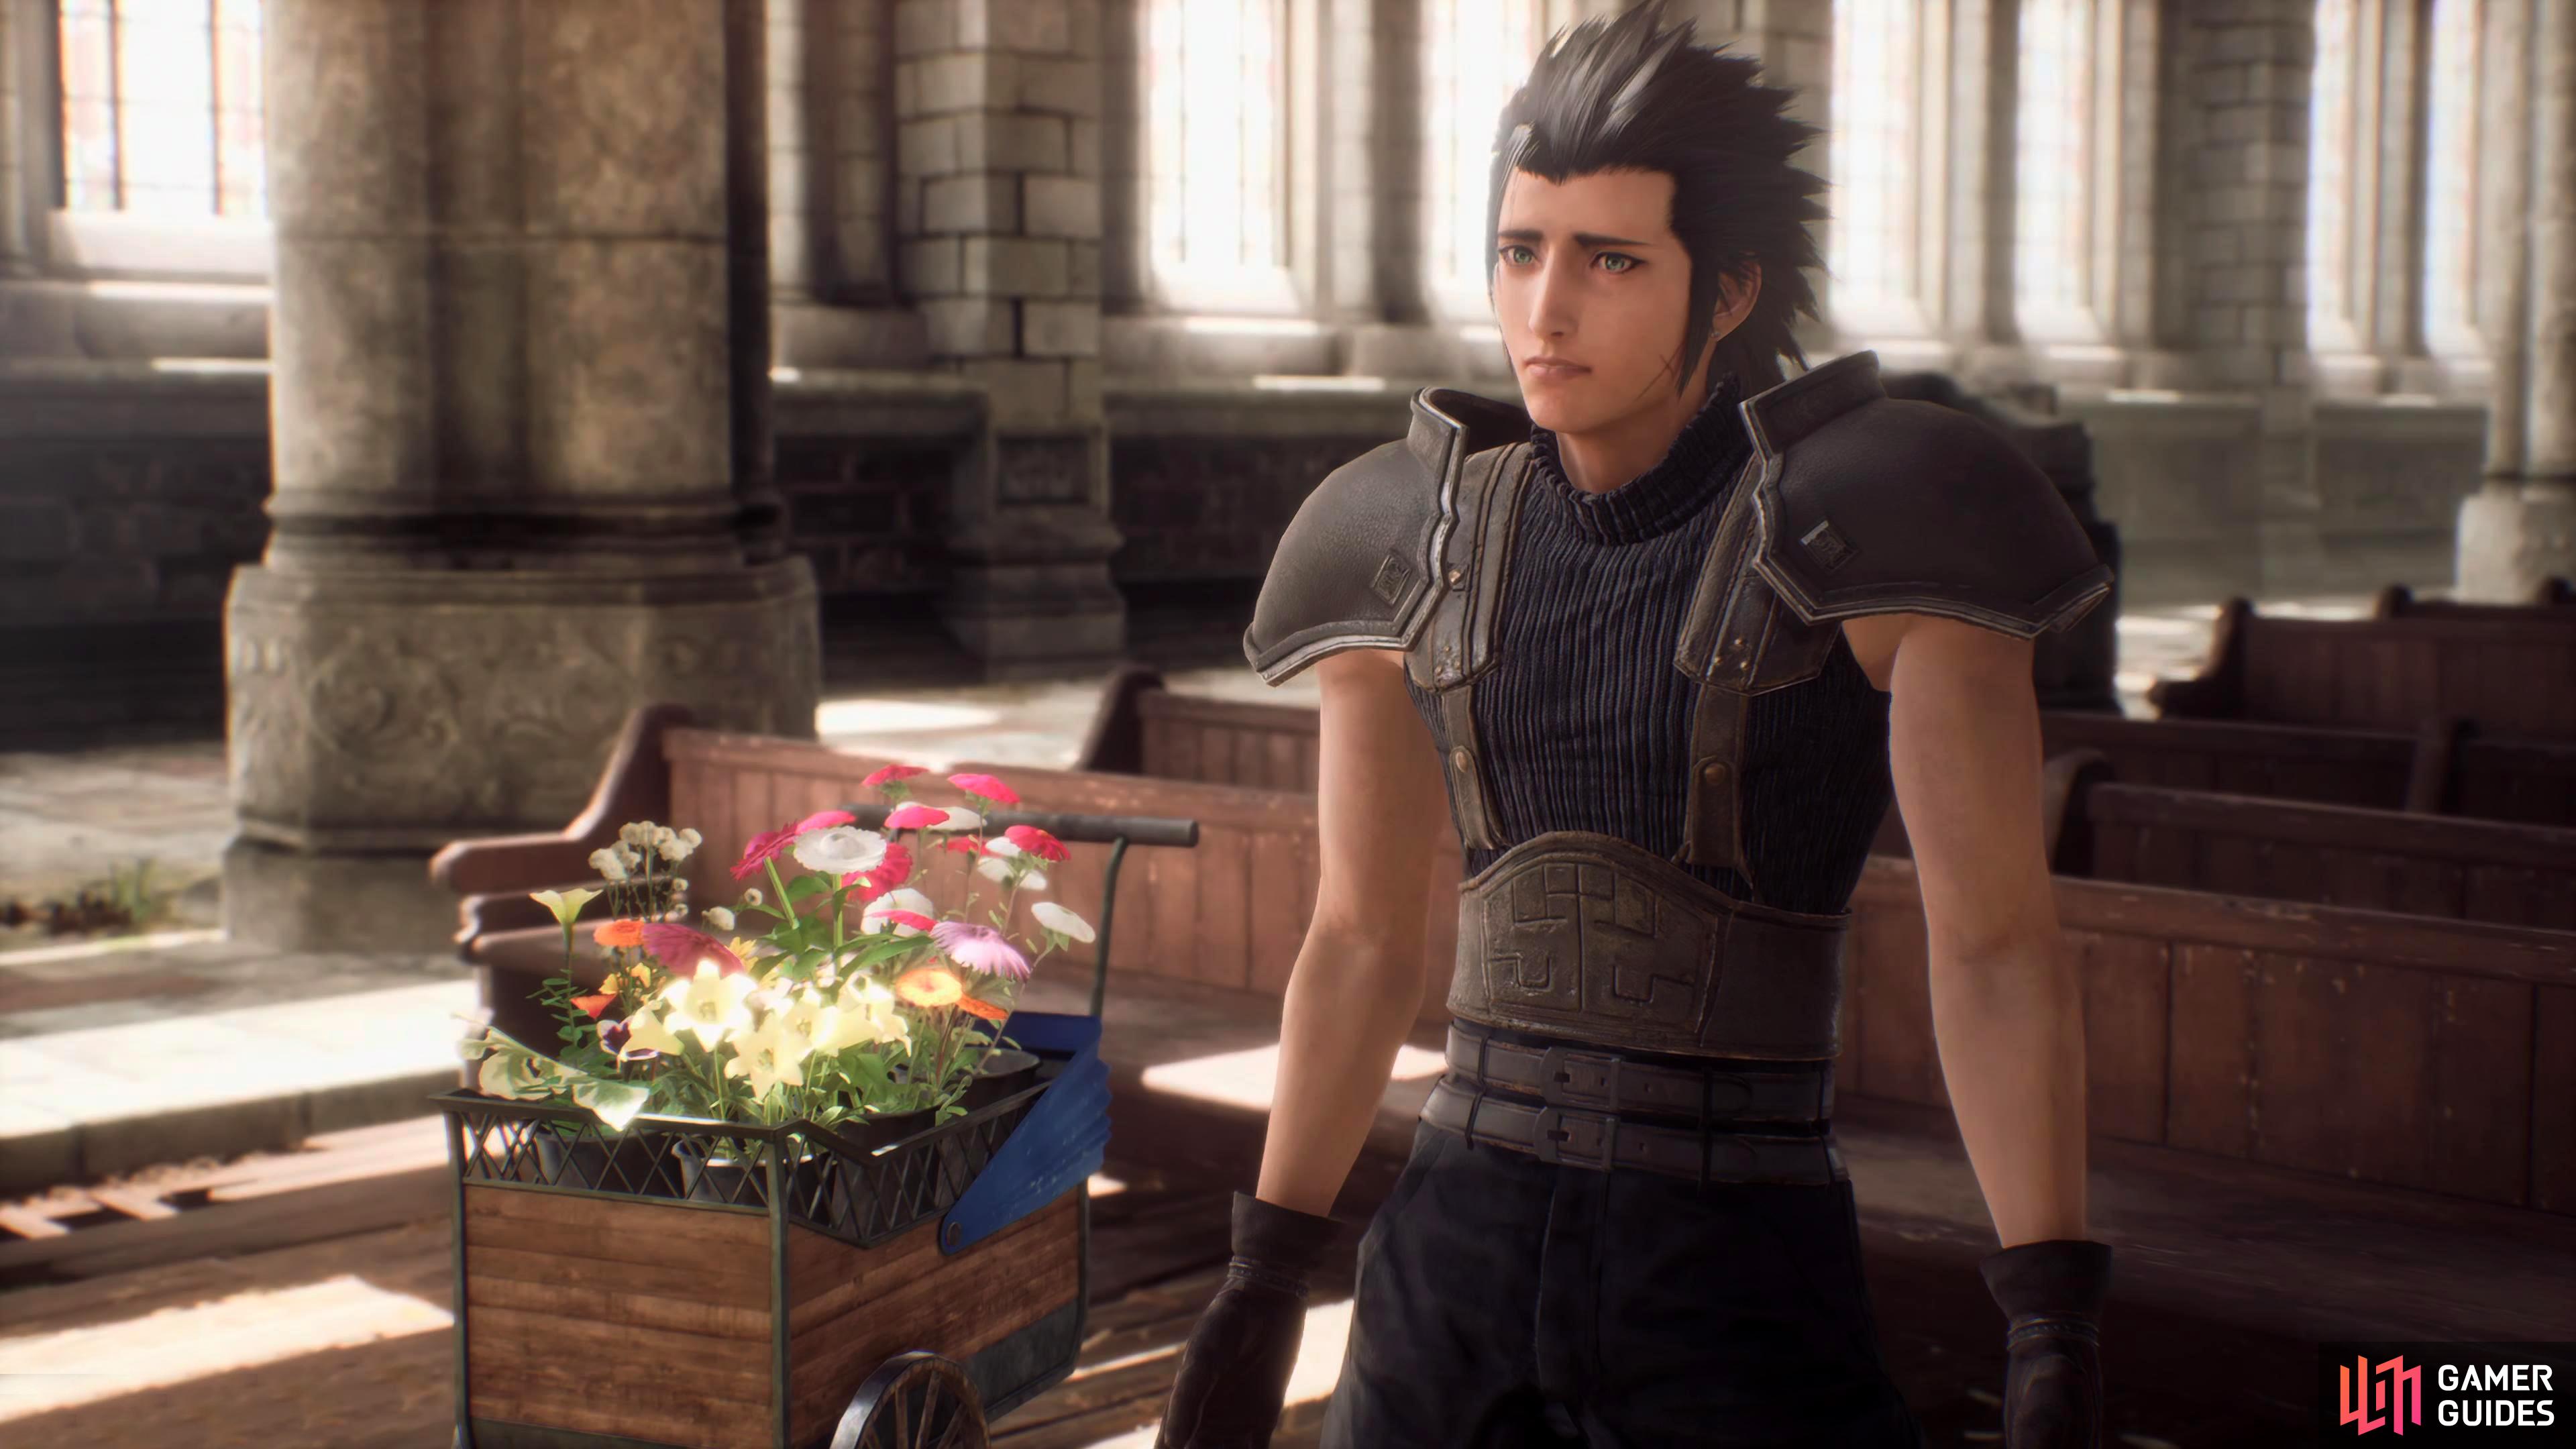 Zack has a disappointed look on his face when Aerith tells him she would like a better wagon.